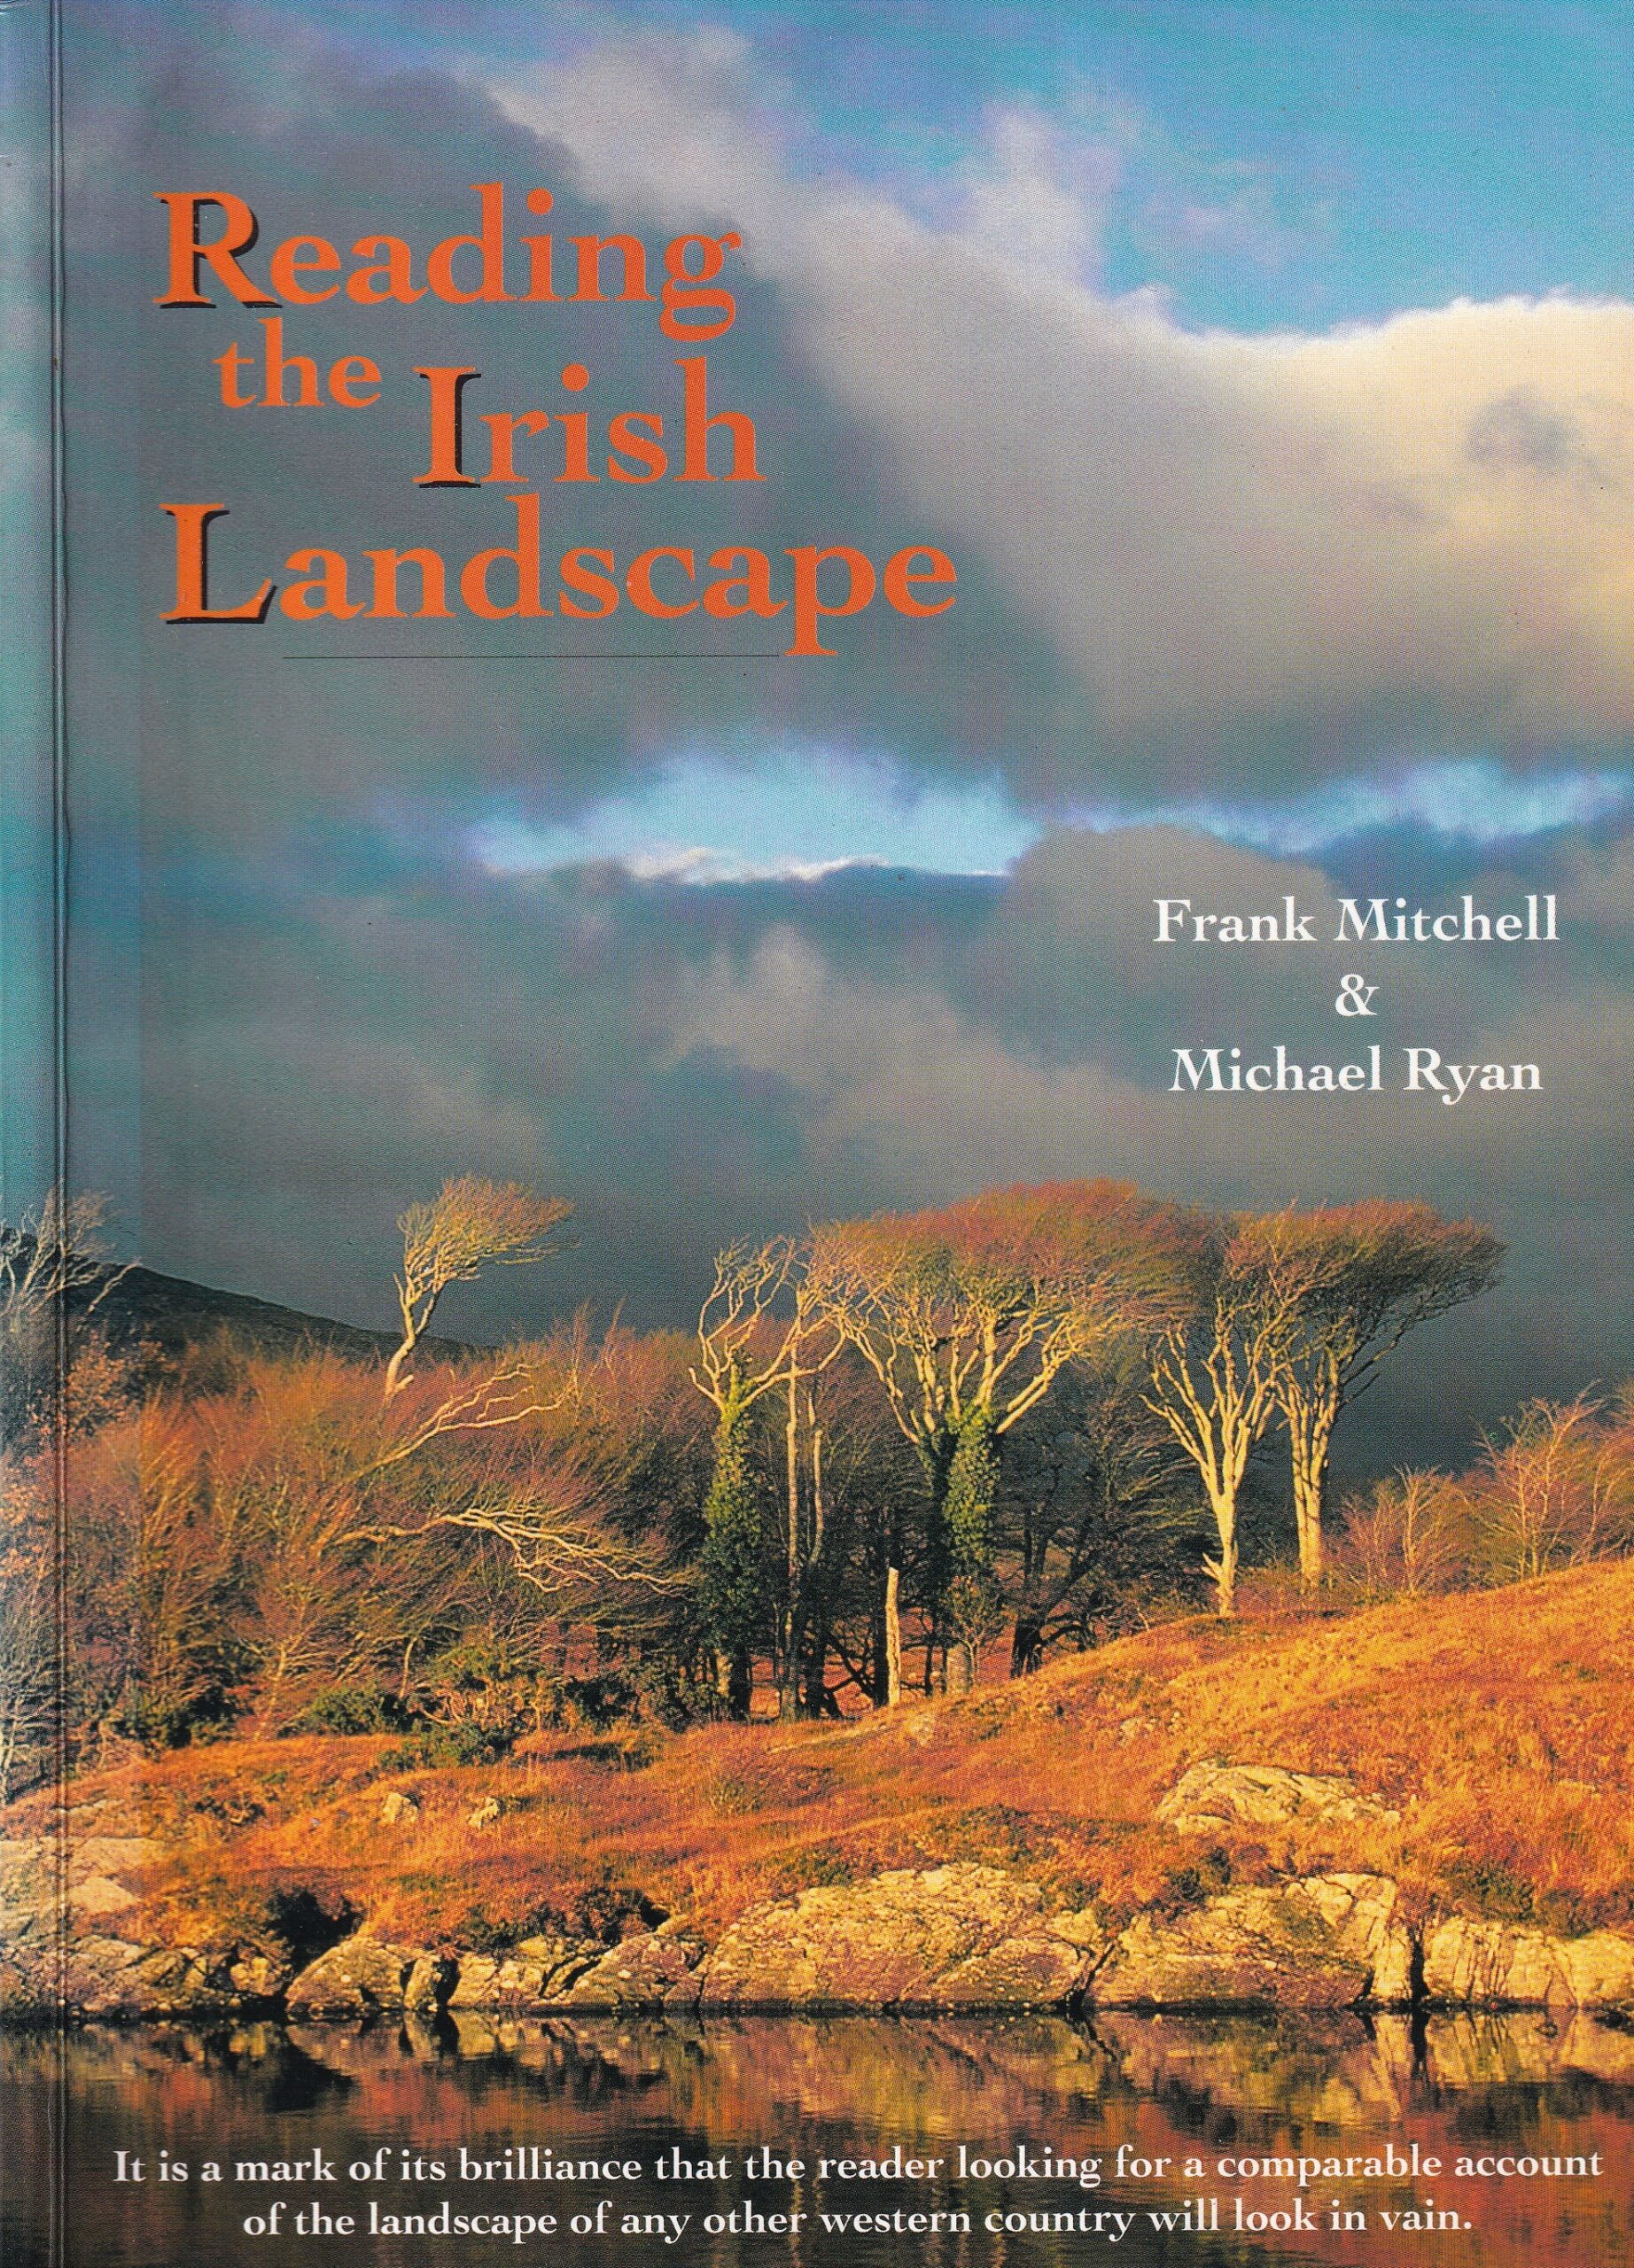 Reading the Irish Landscape by Frank Mitchell and Michael Ryan